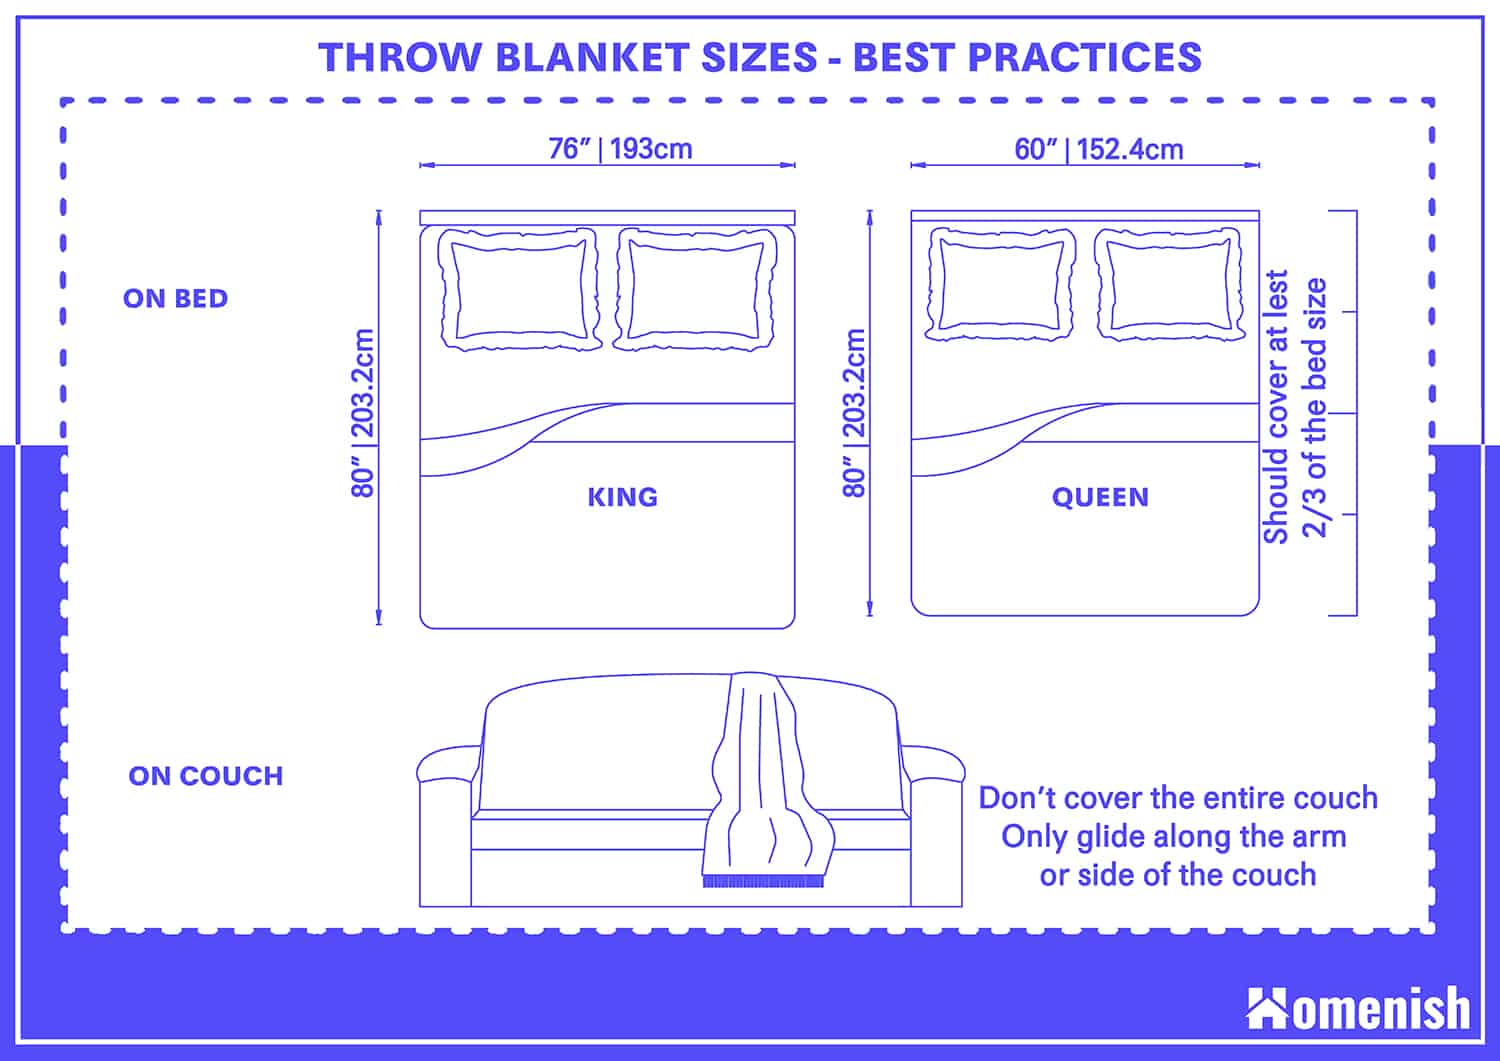 Sizes of Throw Blankets - Best Practices